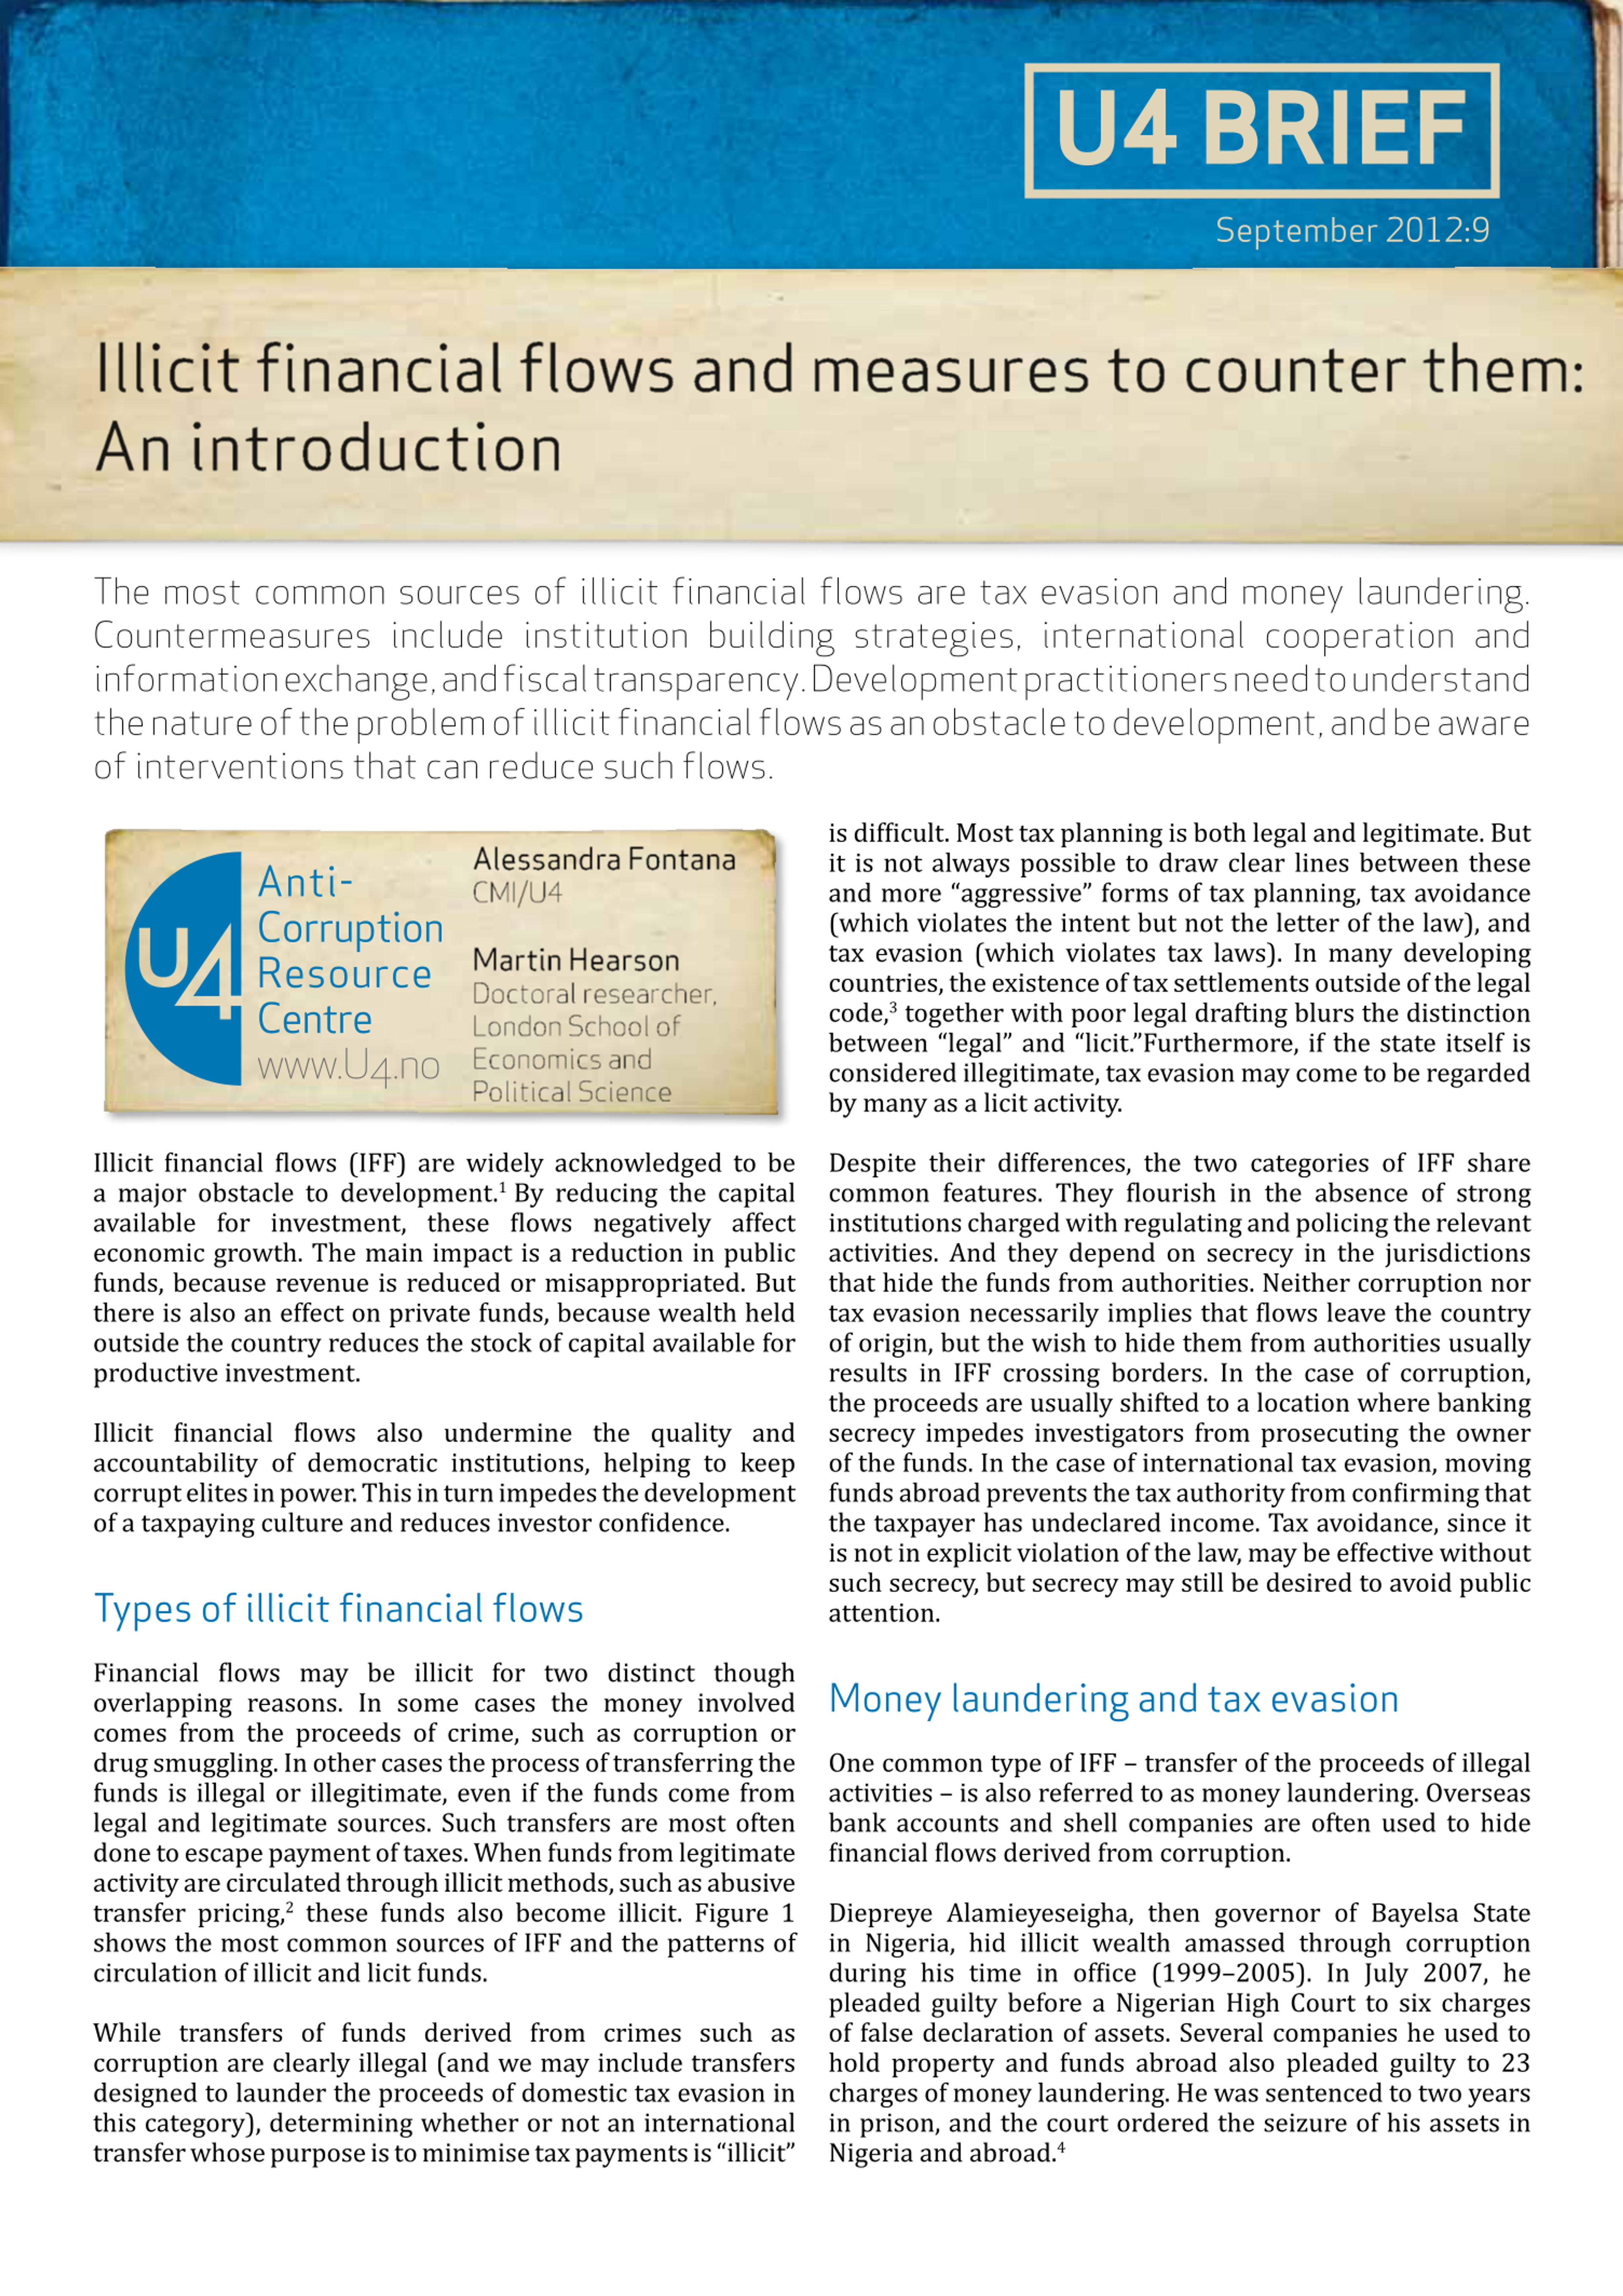 Illicit financial flows and measures to counter them: An introduction